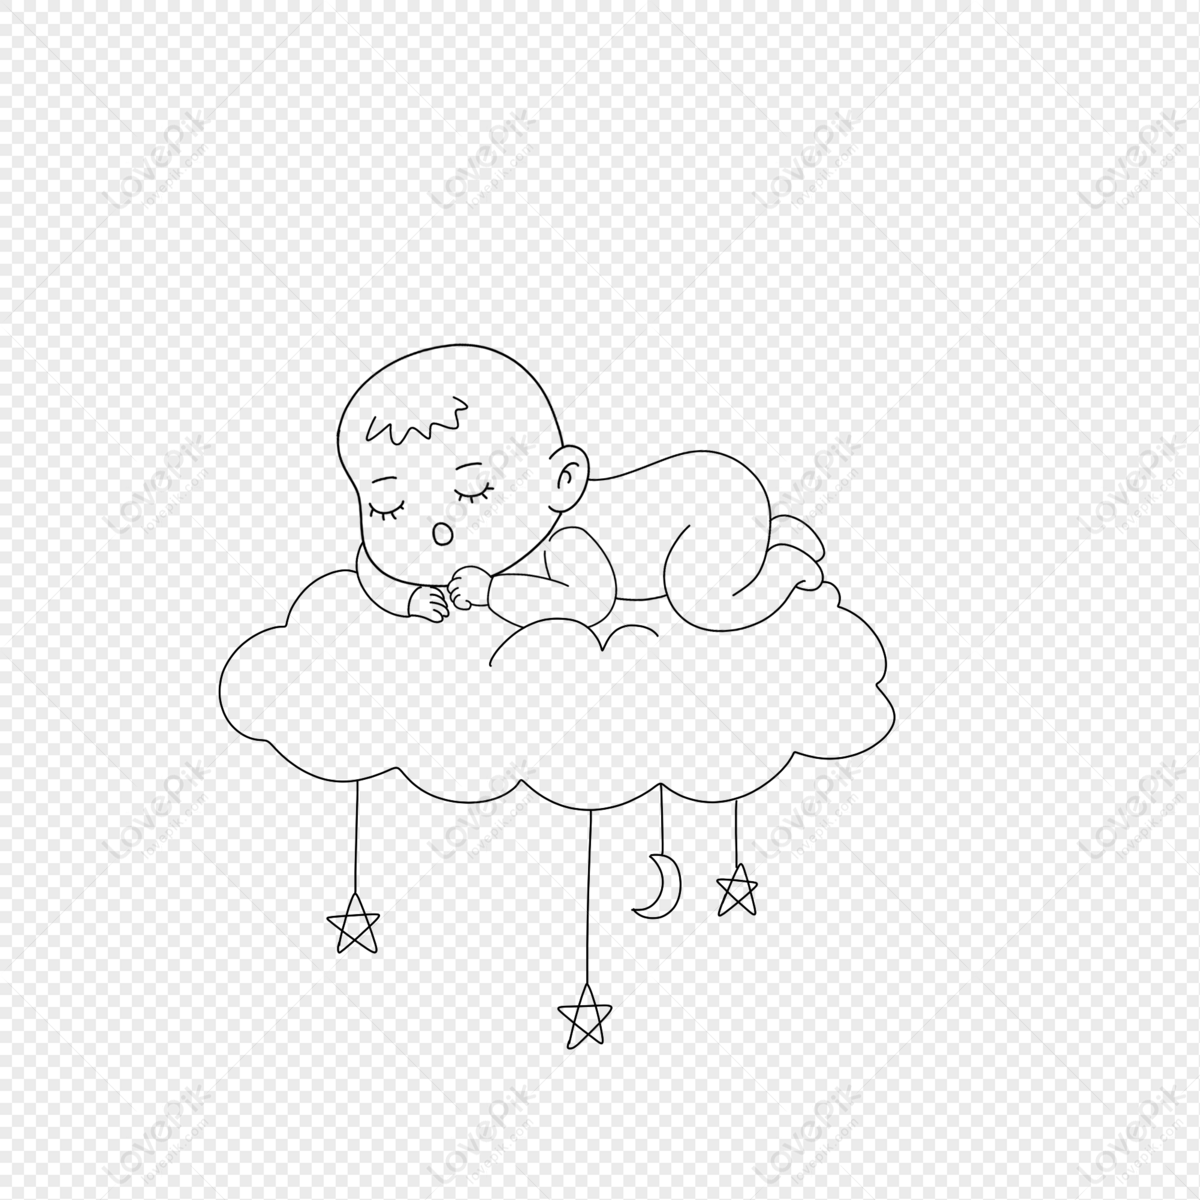 Stick Figure of a Baby Sleeping on the Cloud, cloud, stick figure, cloud baby png white transparent